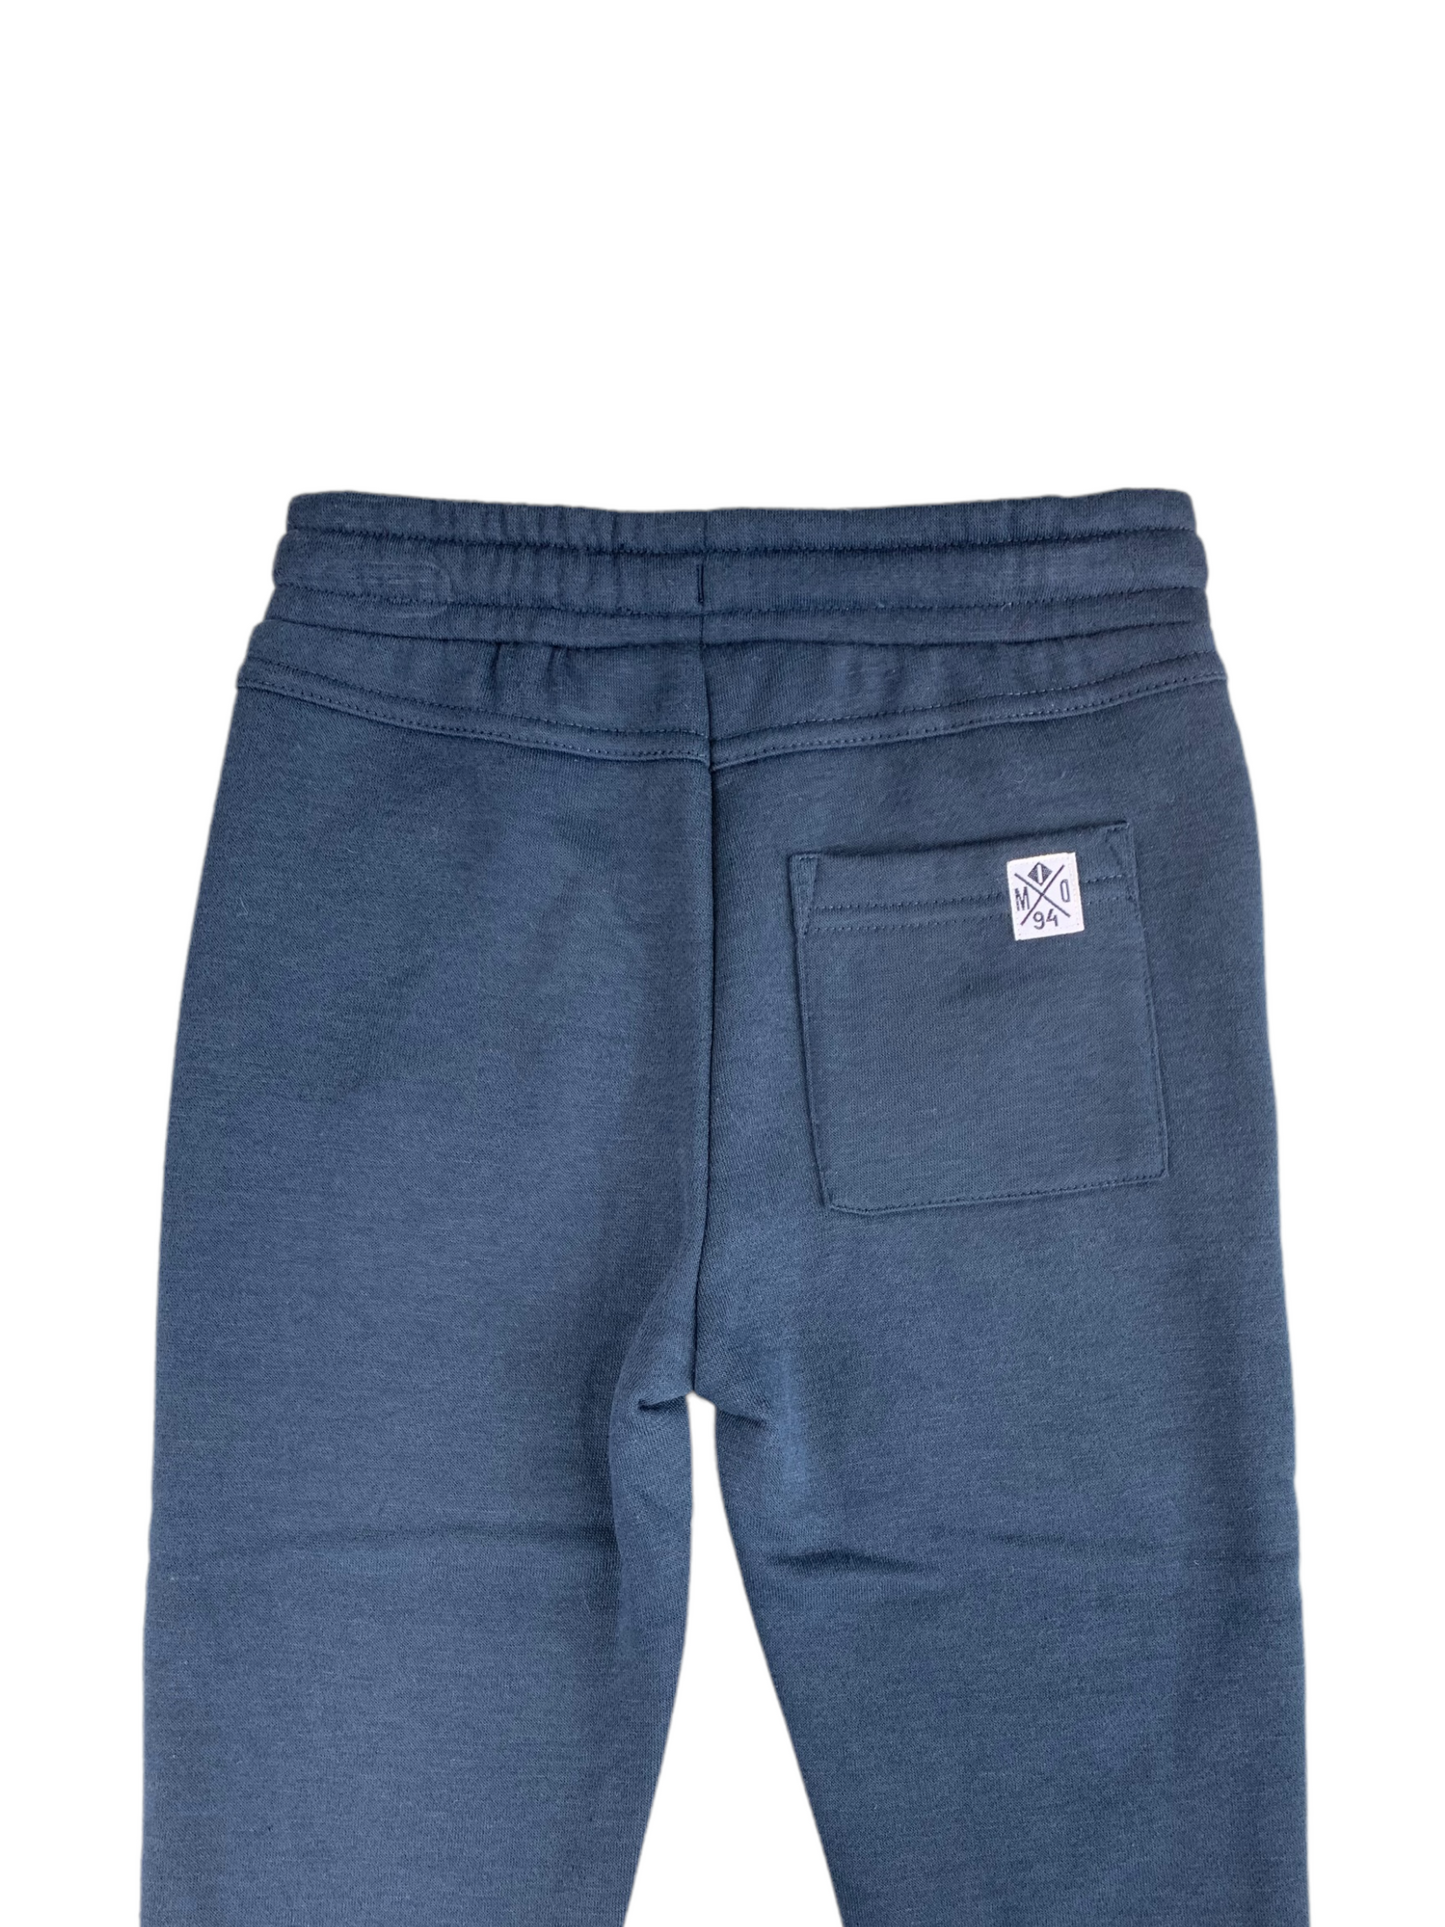 Navy joggers for boys 2 to 7 years